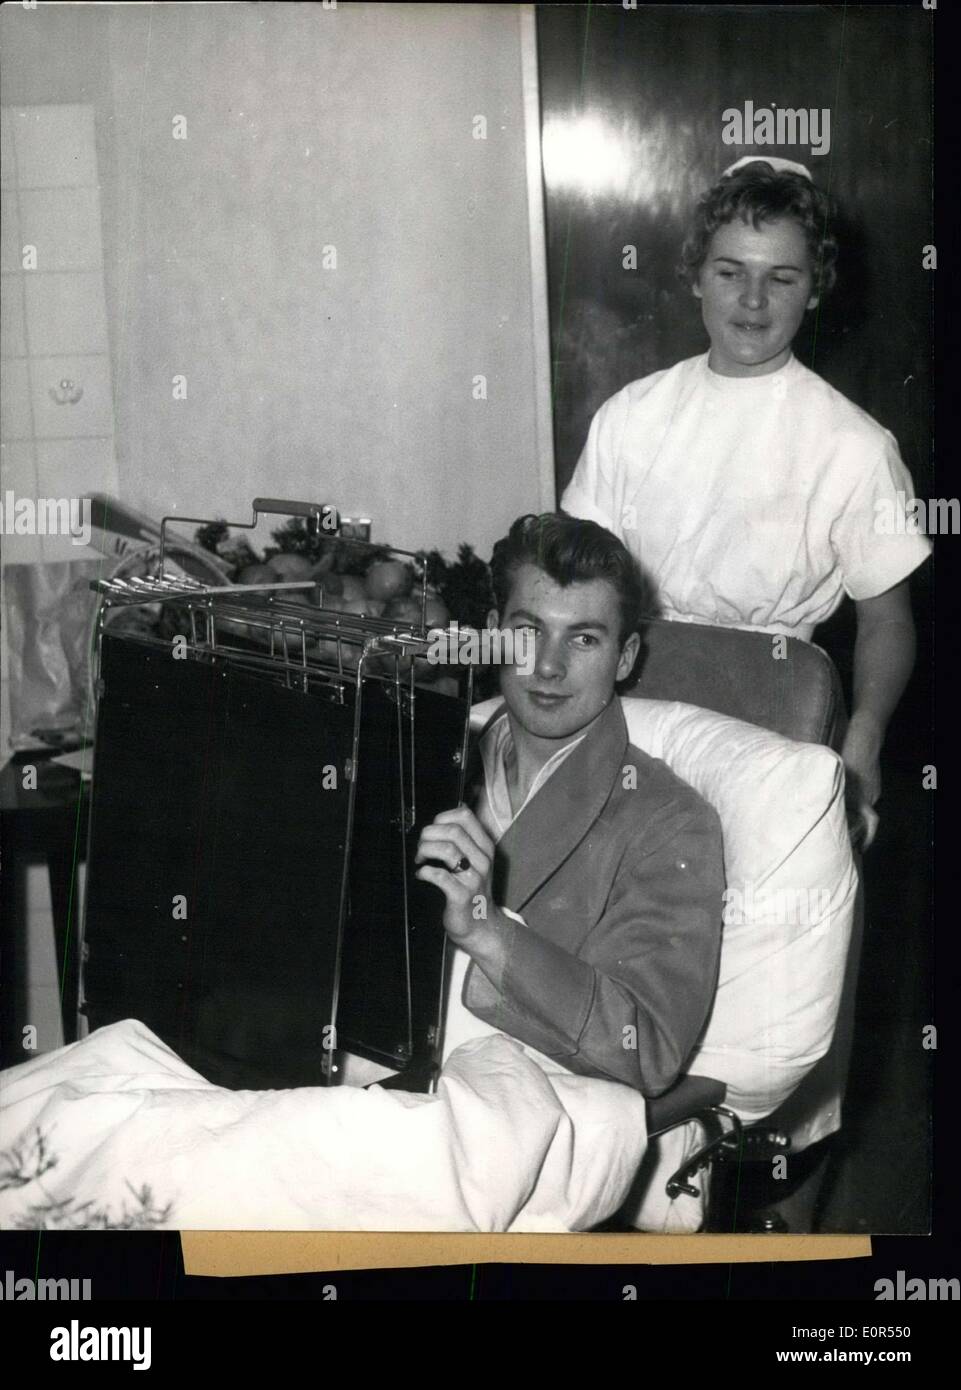 Feb. 11, 1958 - In the hospital at the right side of the Isar in Munich several injured members of the foot-ball team Manchester United, injured at the aircraft's catastrophy at February 7,58 in Munchen-Riem, already are on the way of recovery. Picture 1, Kwn Morgan sitting in a wheel chair on the way to the X-rays. Picture 2, Bobby Charlton already is drinking out of a genuine Bavarian beer-tankard. Picture 3, Wood Raymond (left side) and Bobby Charlton (right side) already are able to laugh Stock Photo